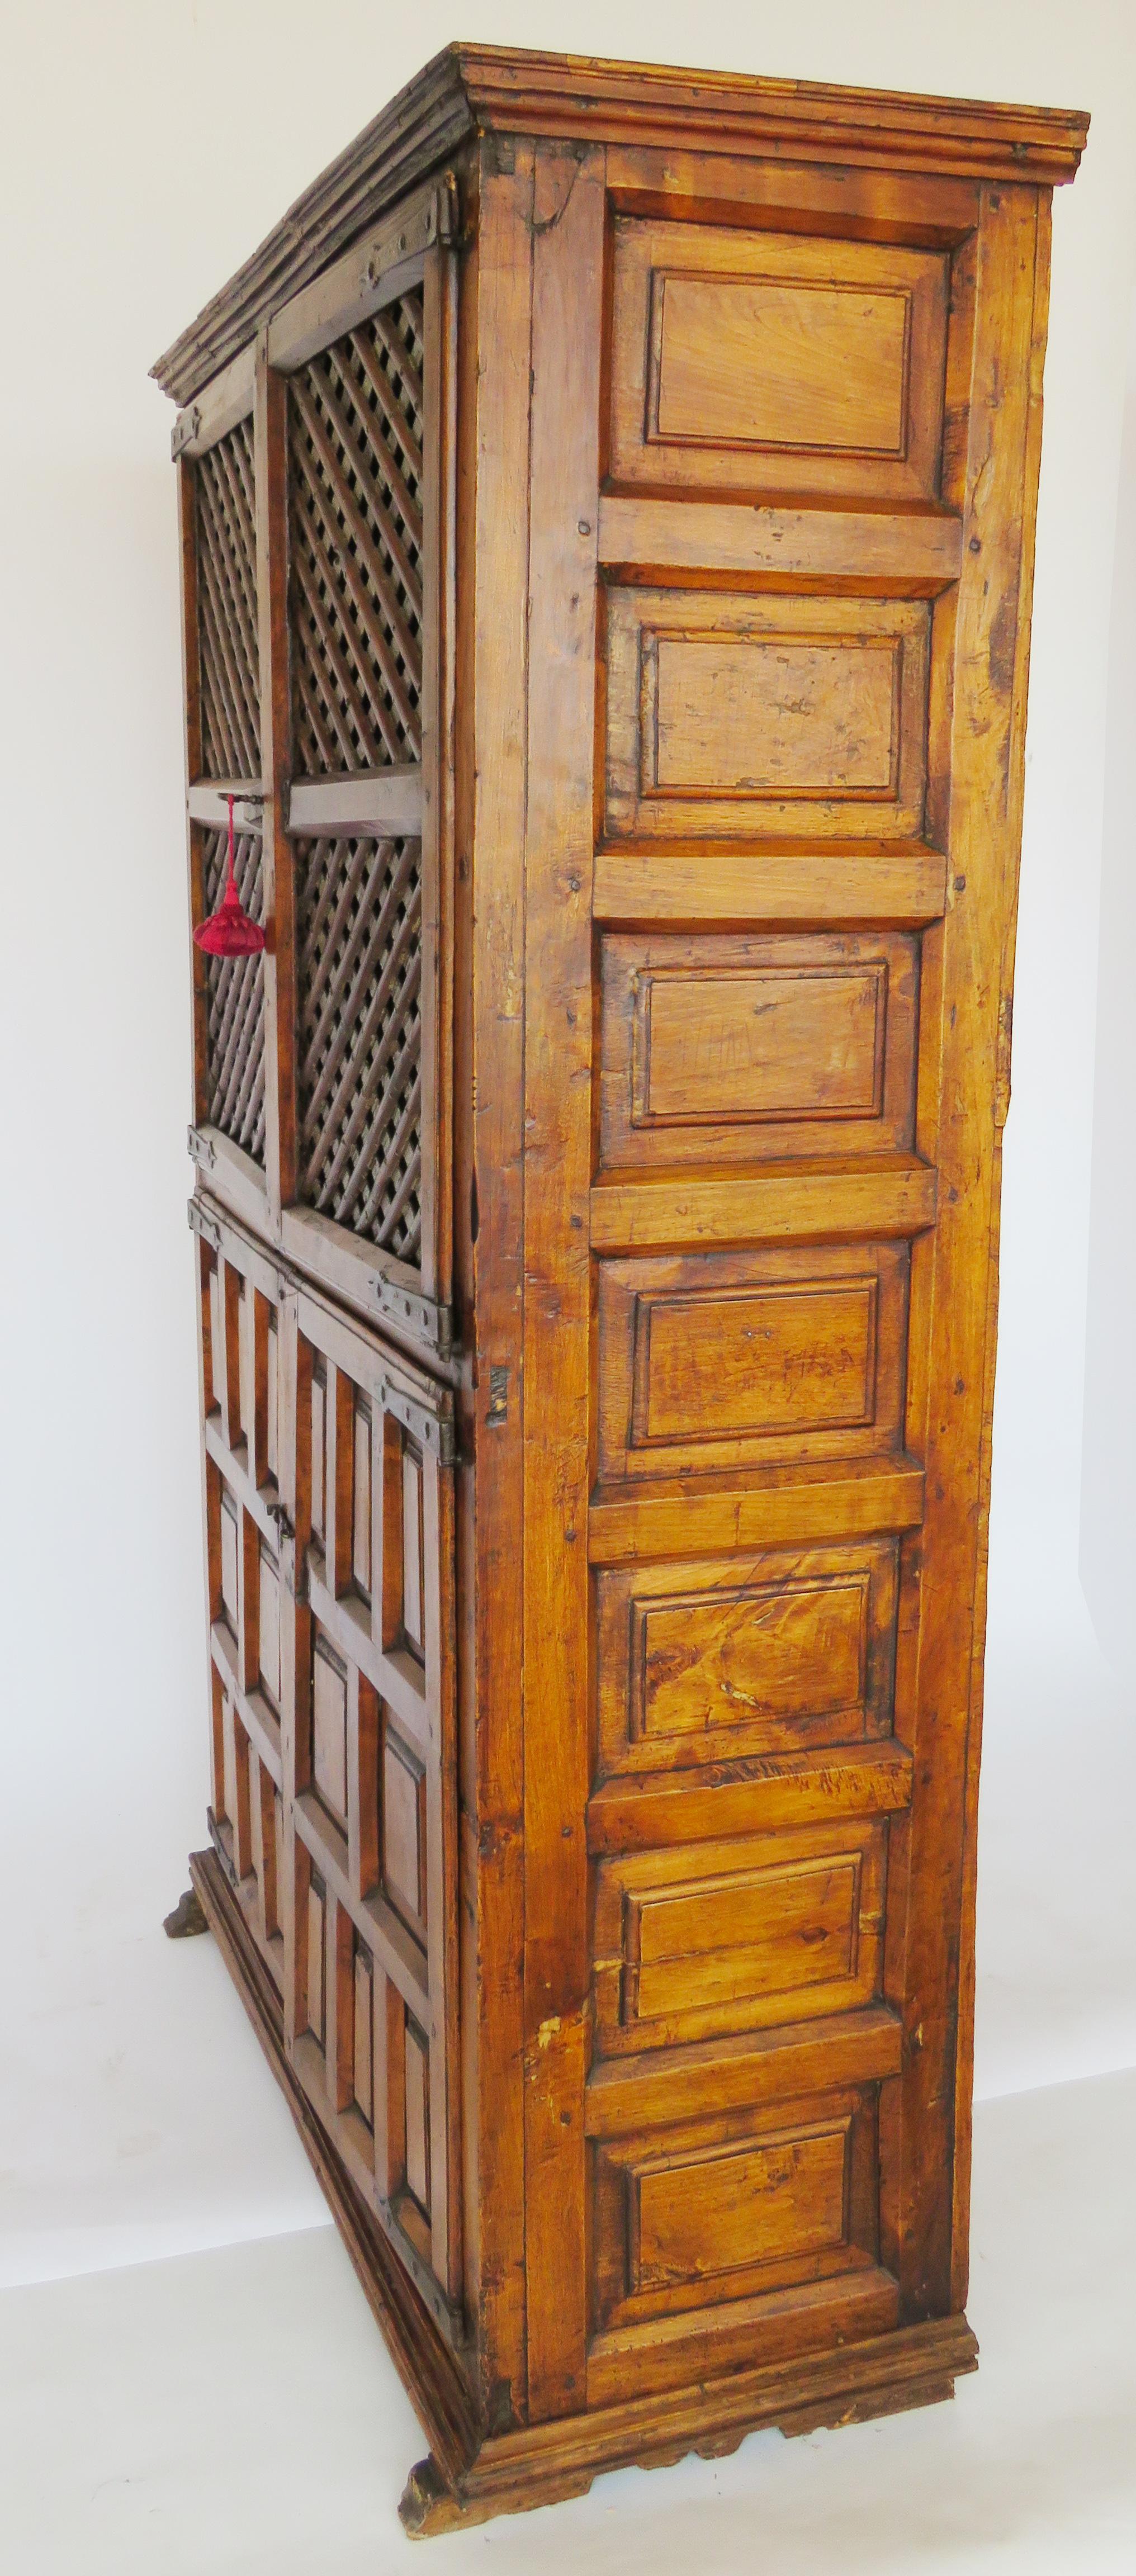 Hand-Crafted 18th Century Baroque Larder Cabinet For Sale